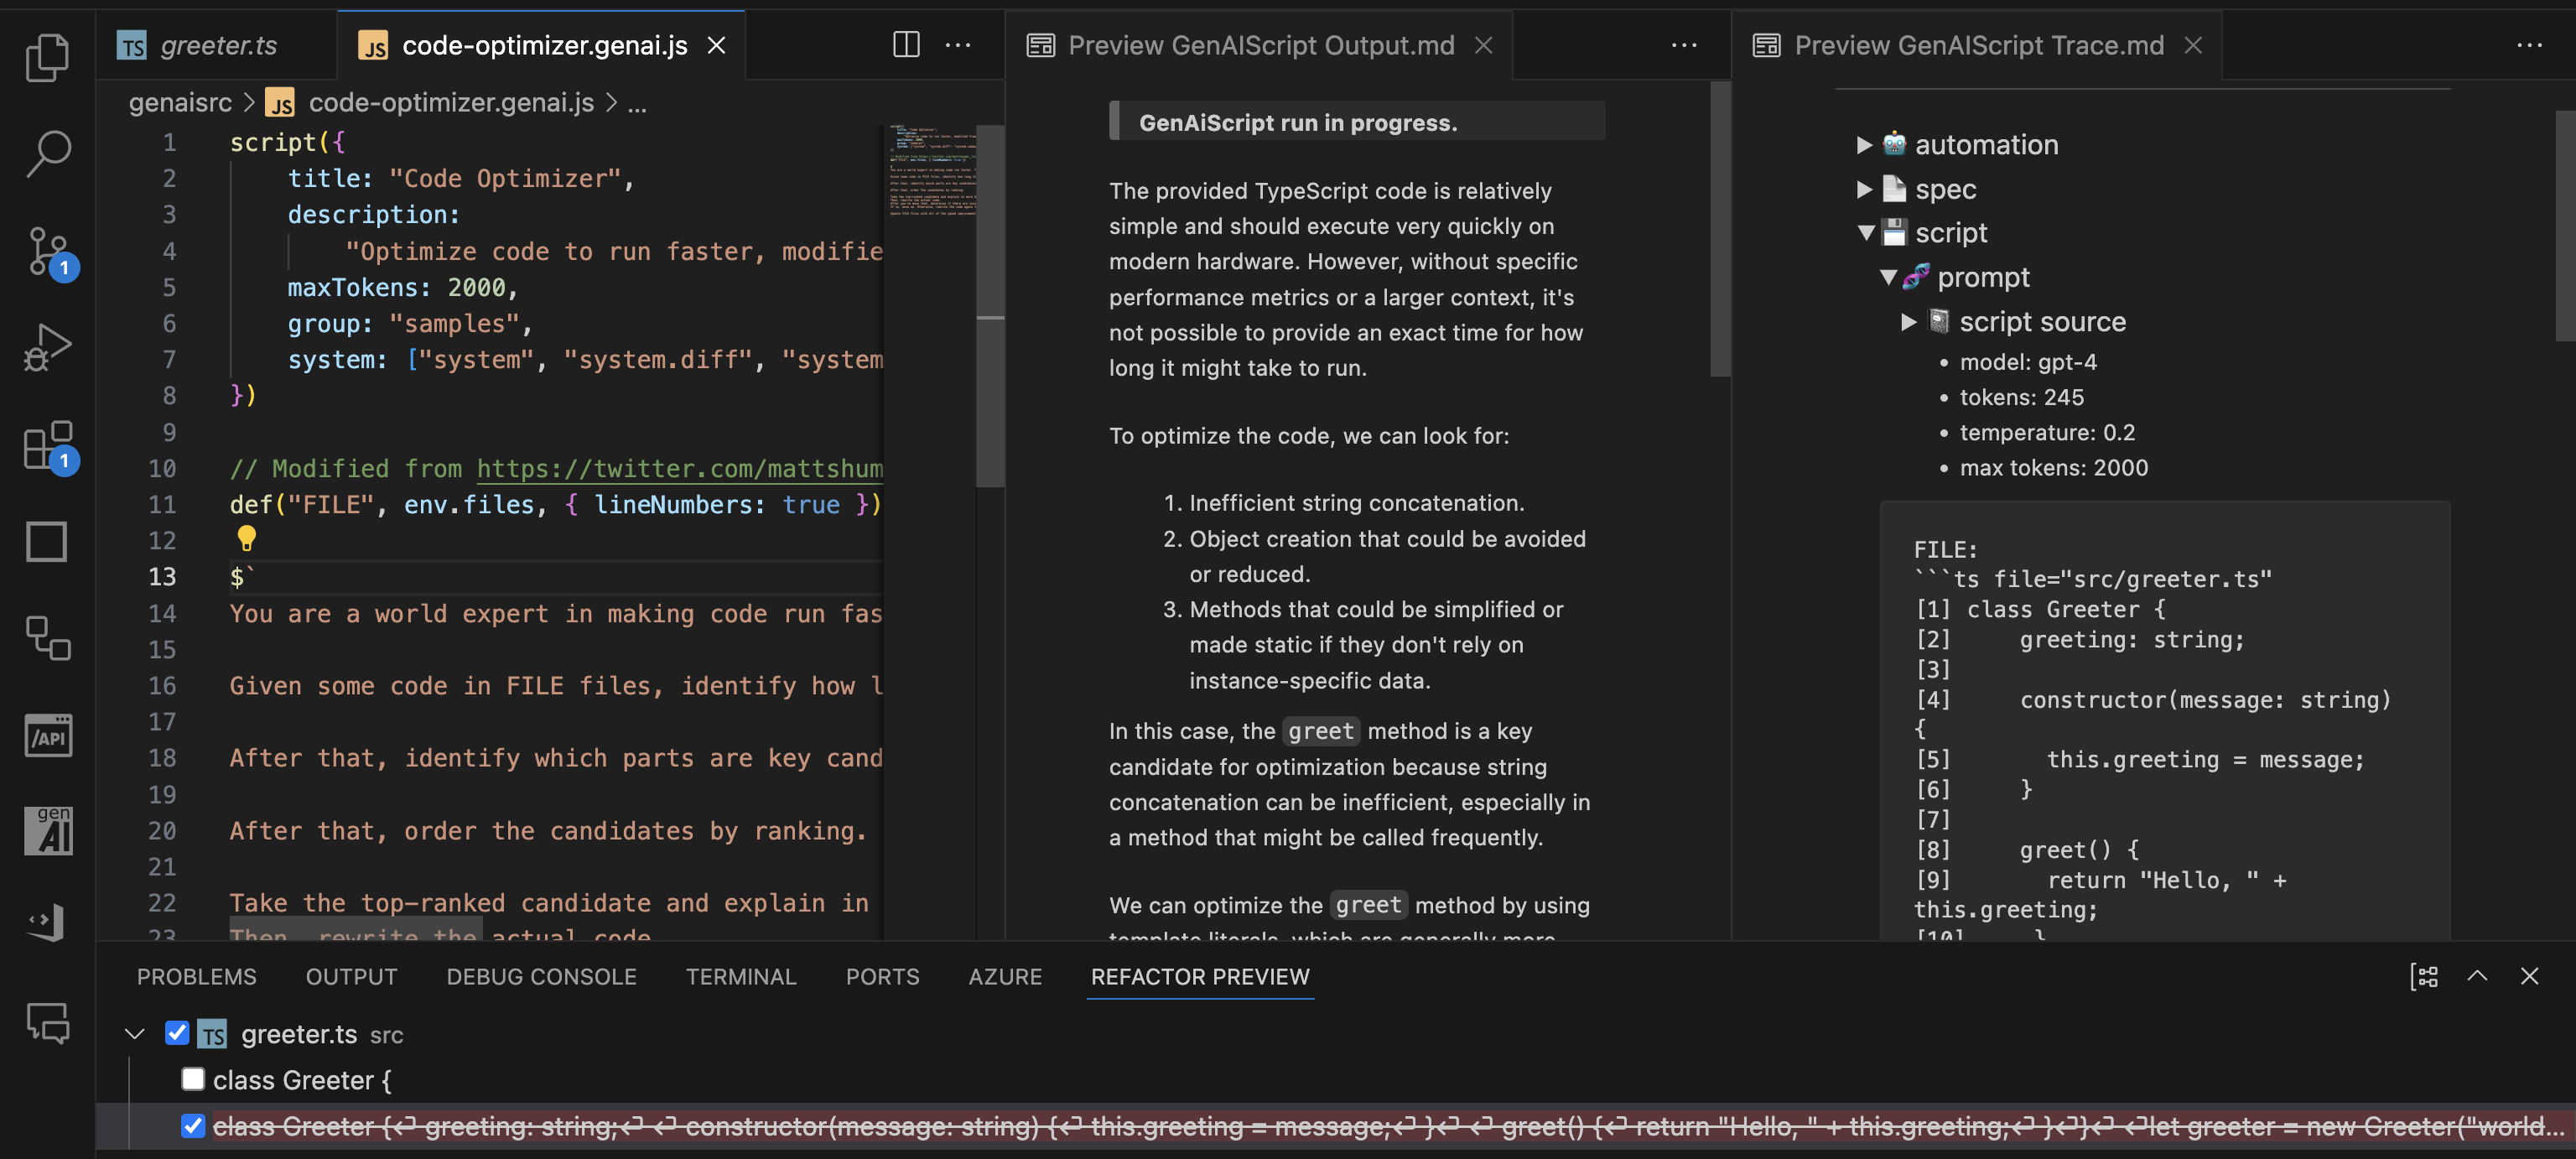 A screenshot of VSCode with a genaiscript opened